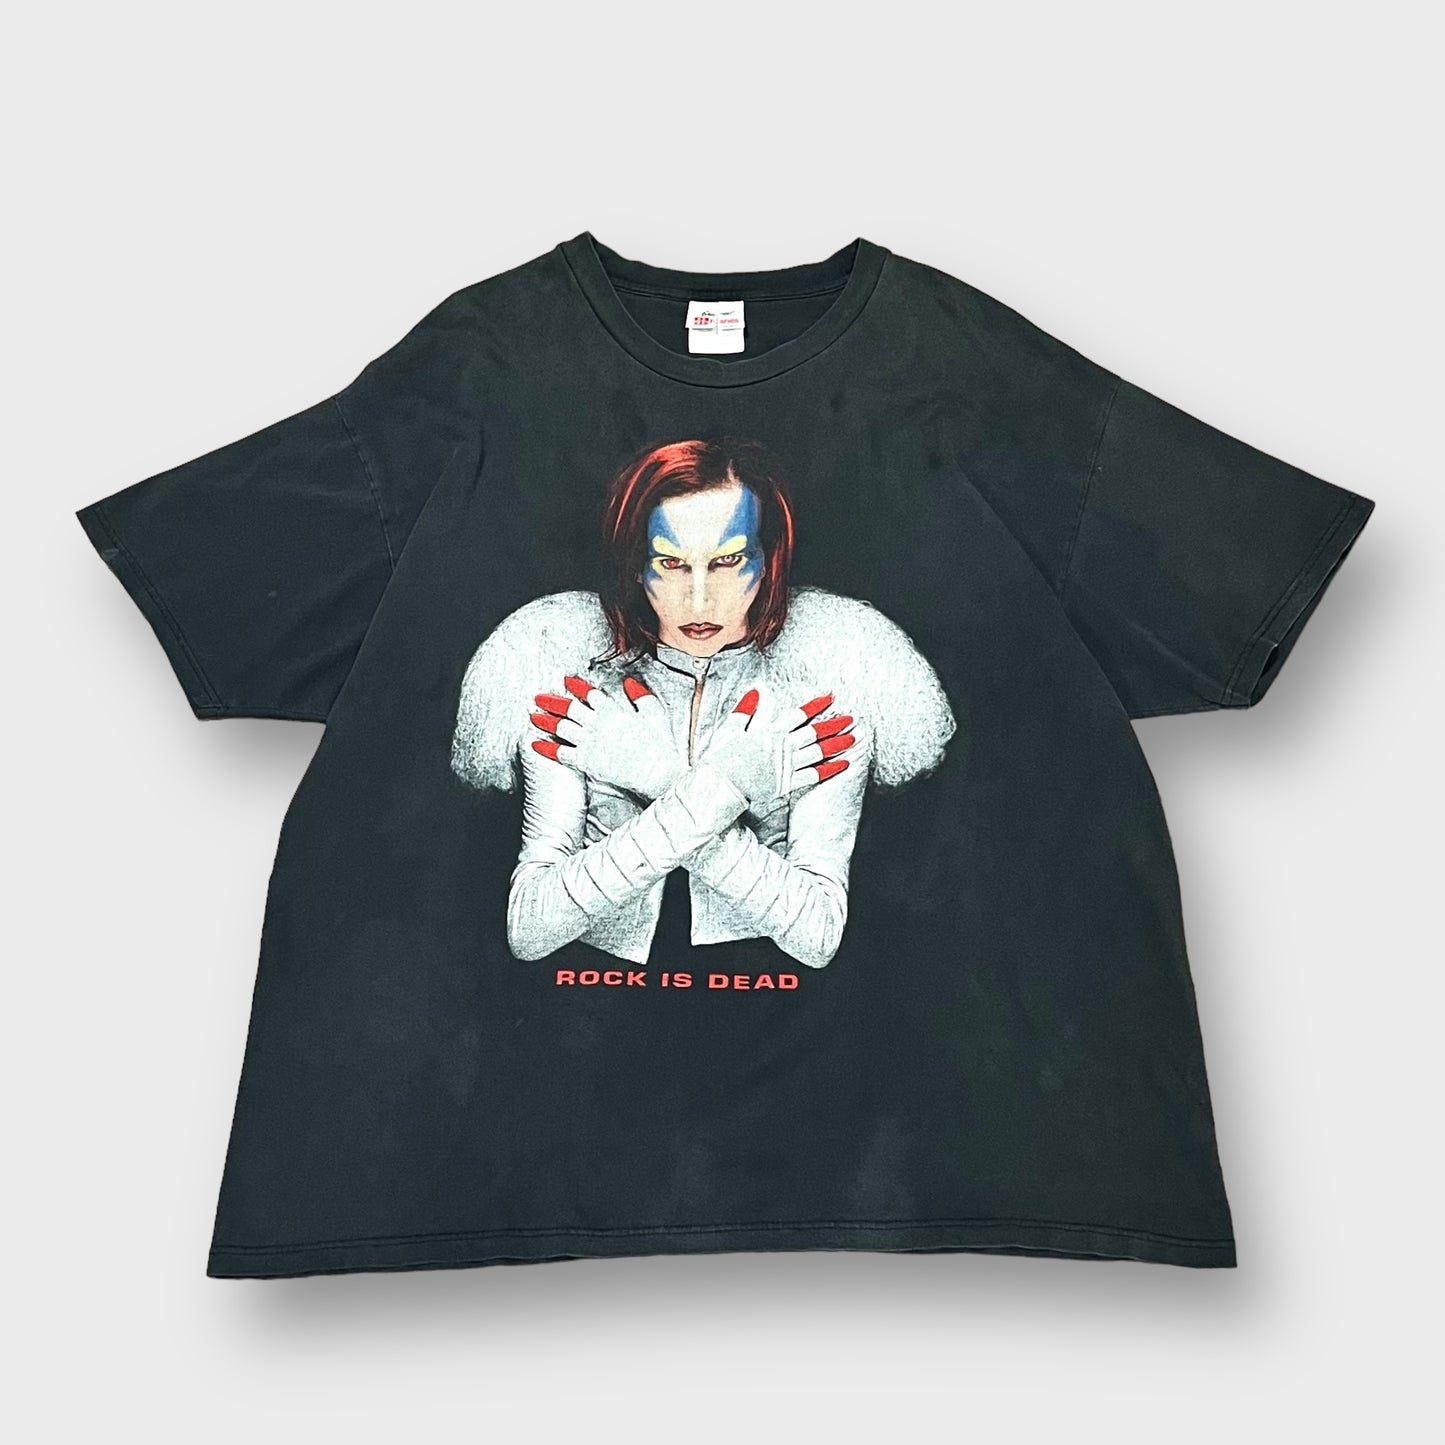 00’s Marilyn Manson
ROCK IS DEAD OMEGA AND THE MECHANICAL ANIMALS t-shirt